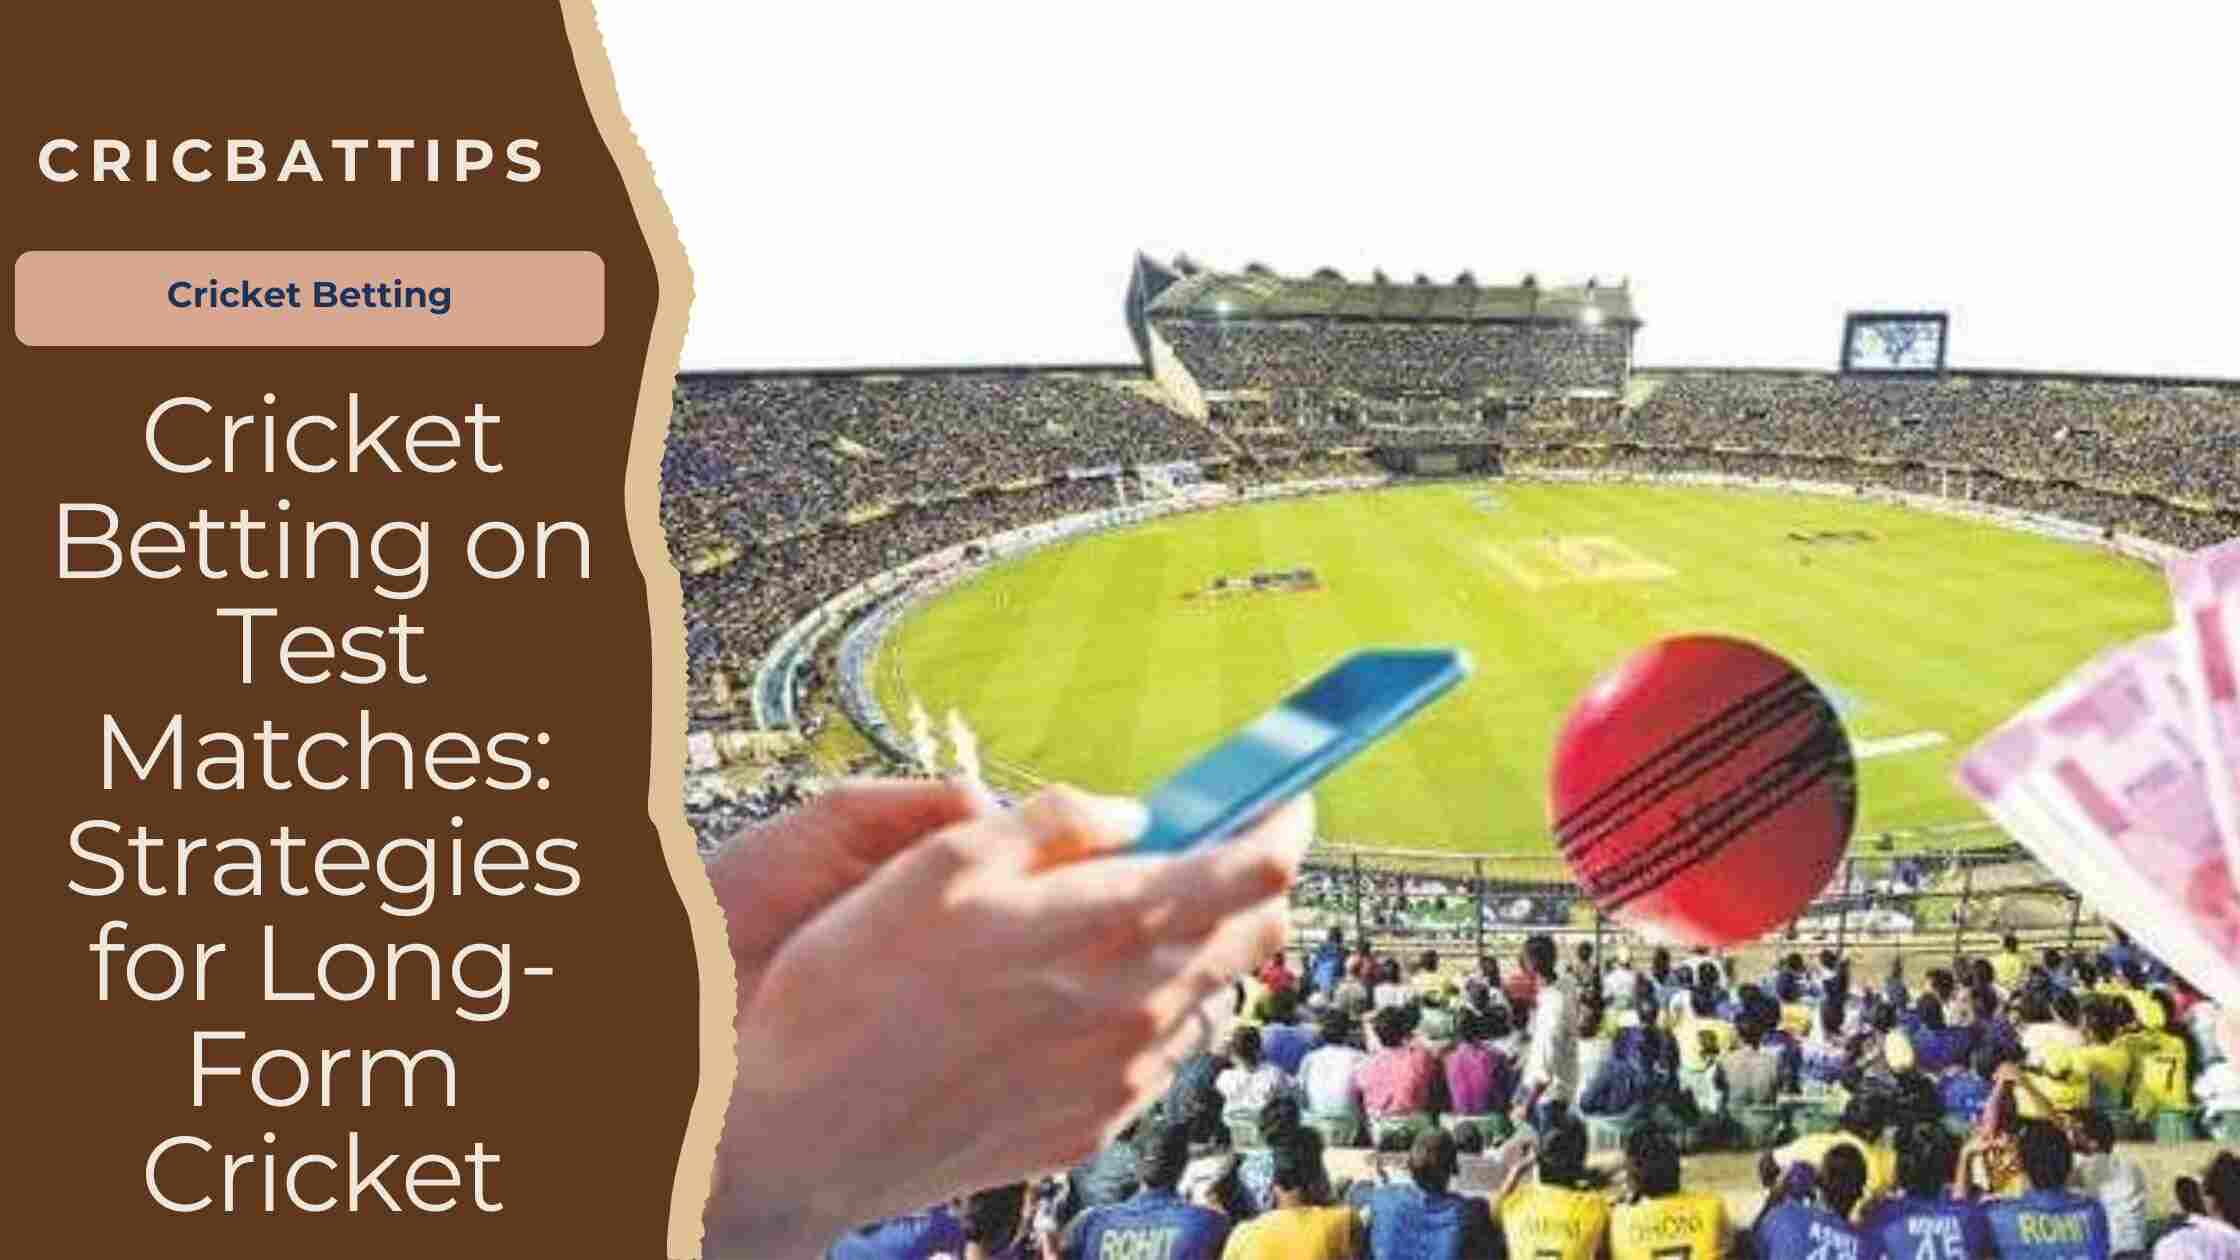 Cricket Betting on Test Matches